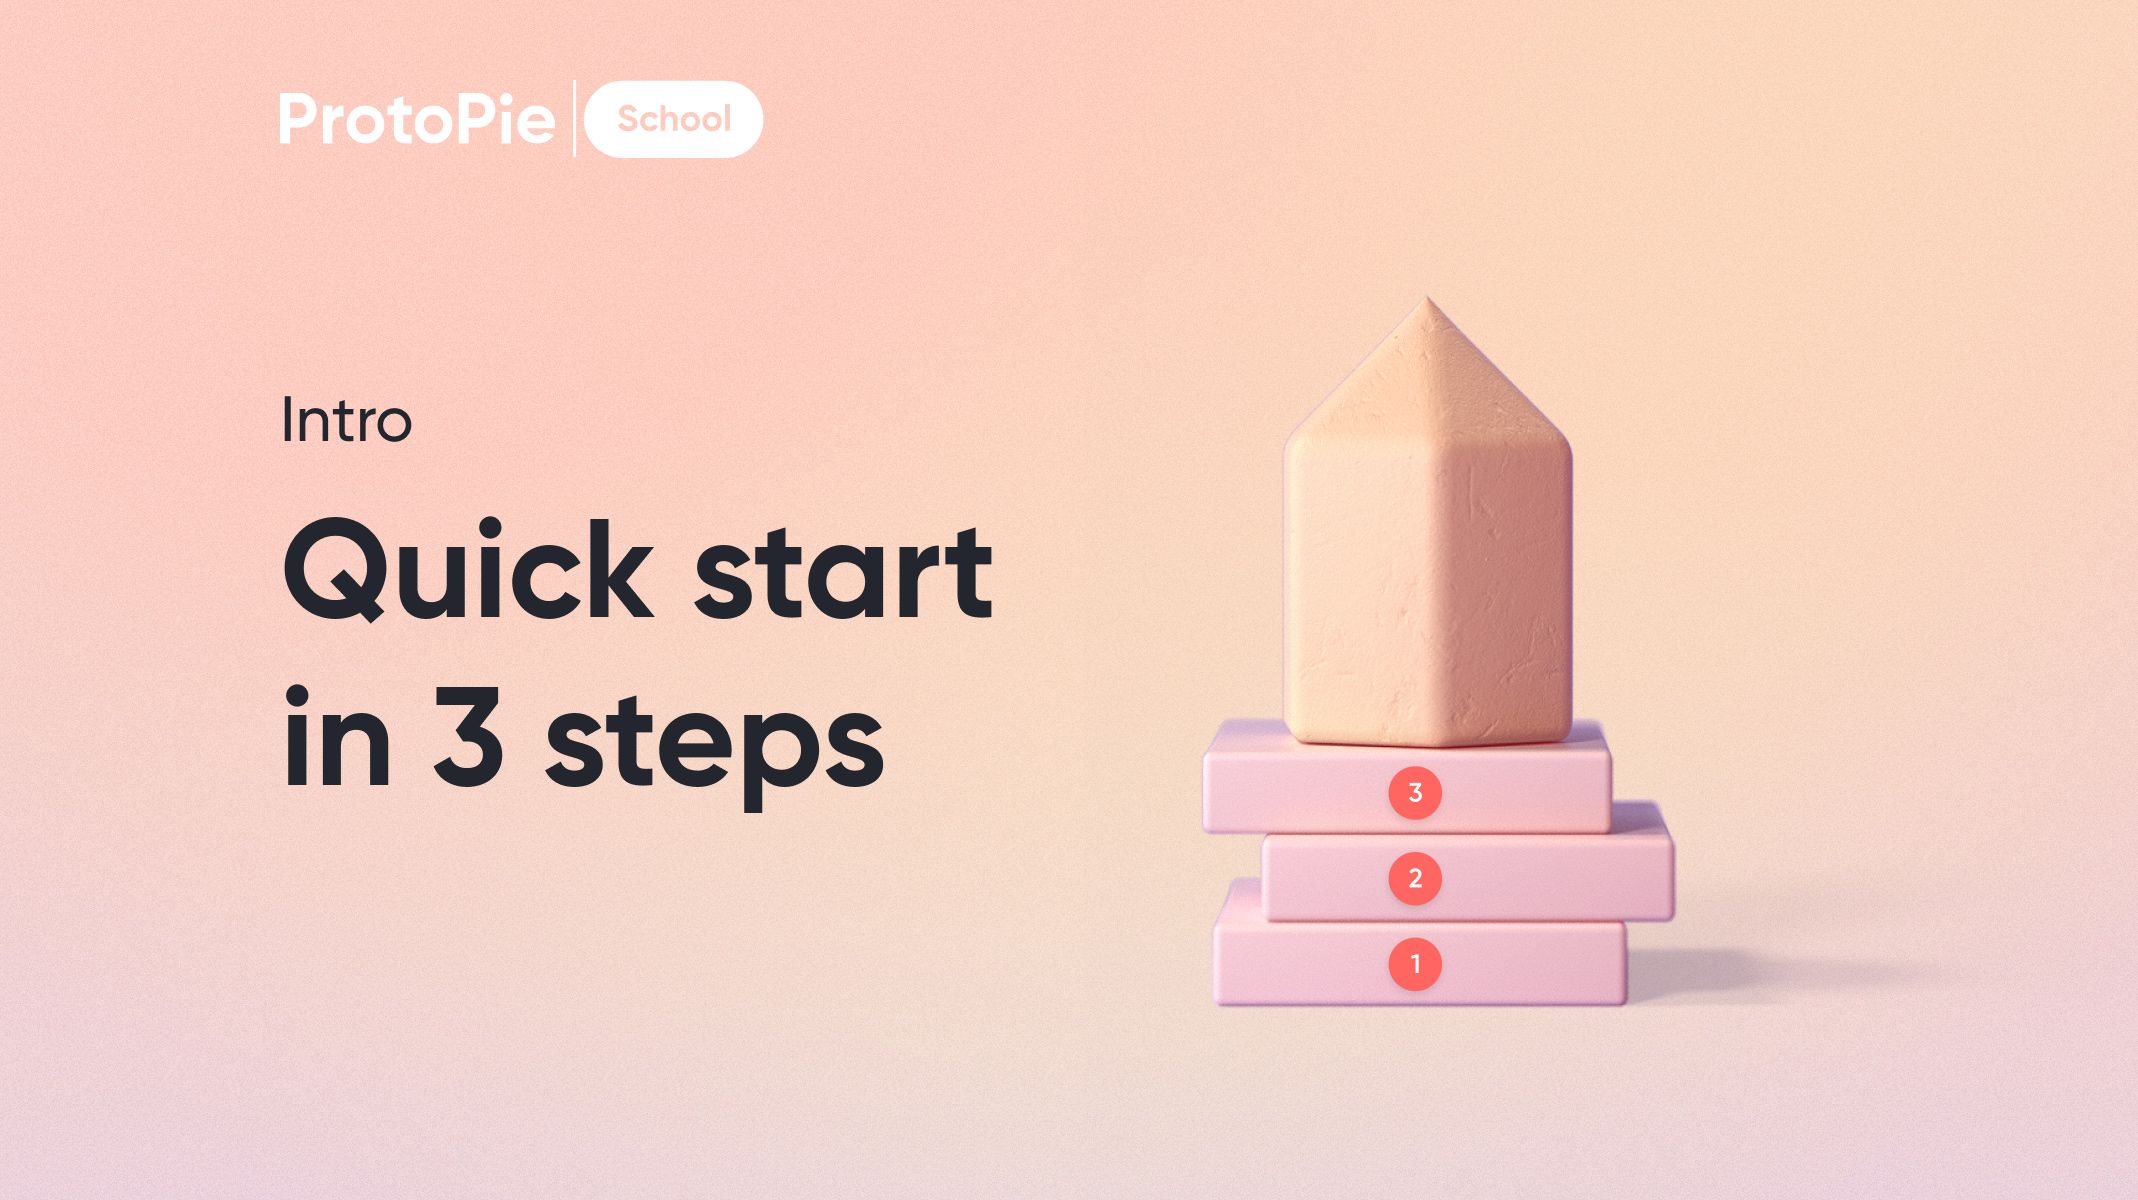 Figma Sketch Protopie designs, themes, templates and downloadable graphic  elements on Dribbble